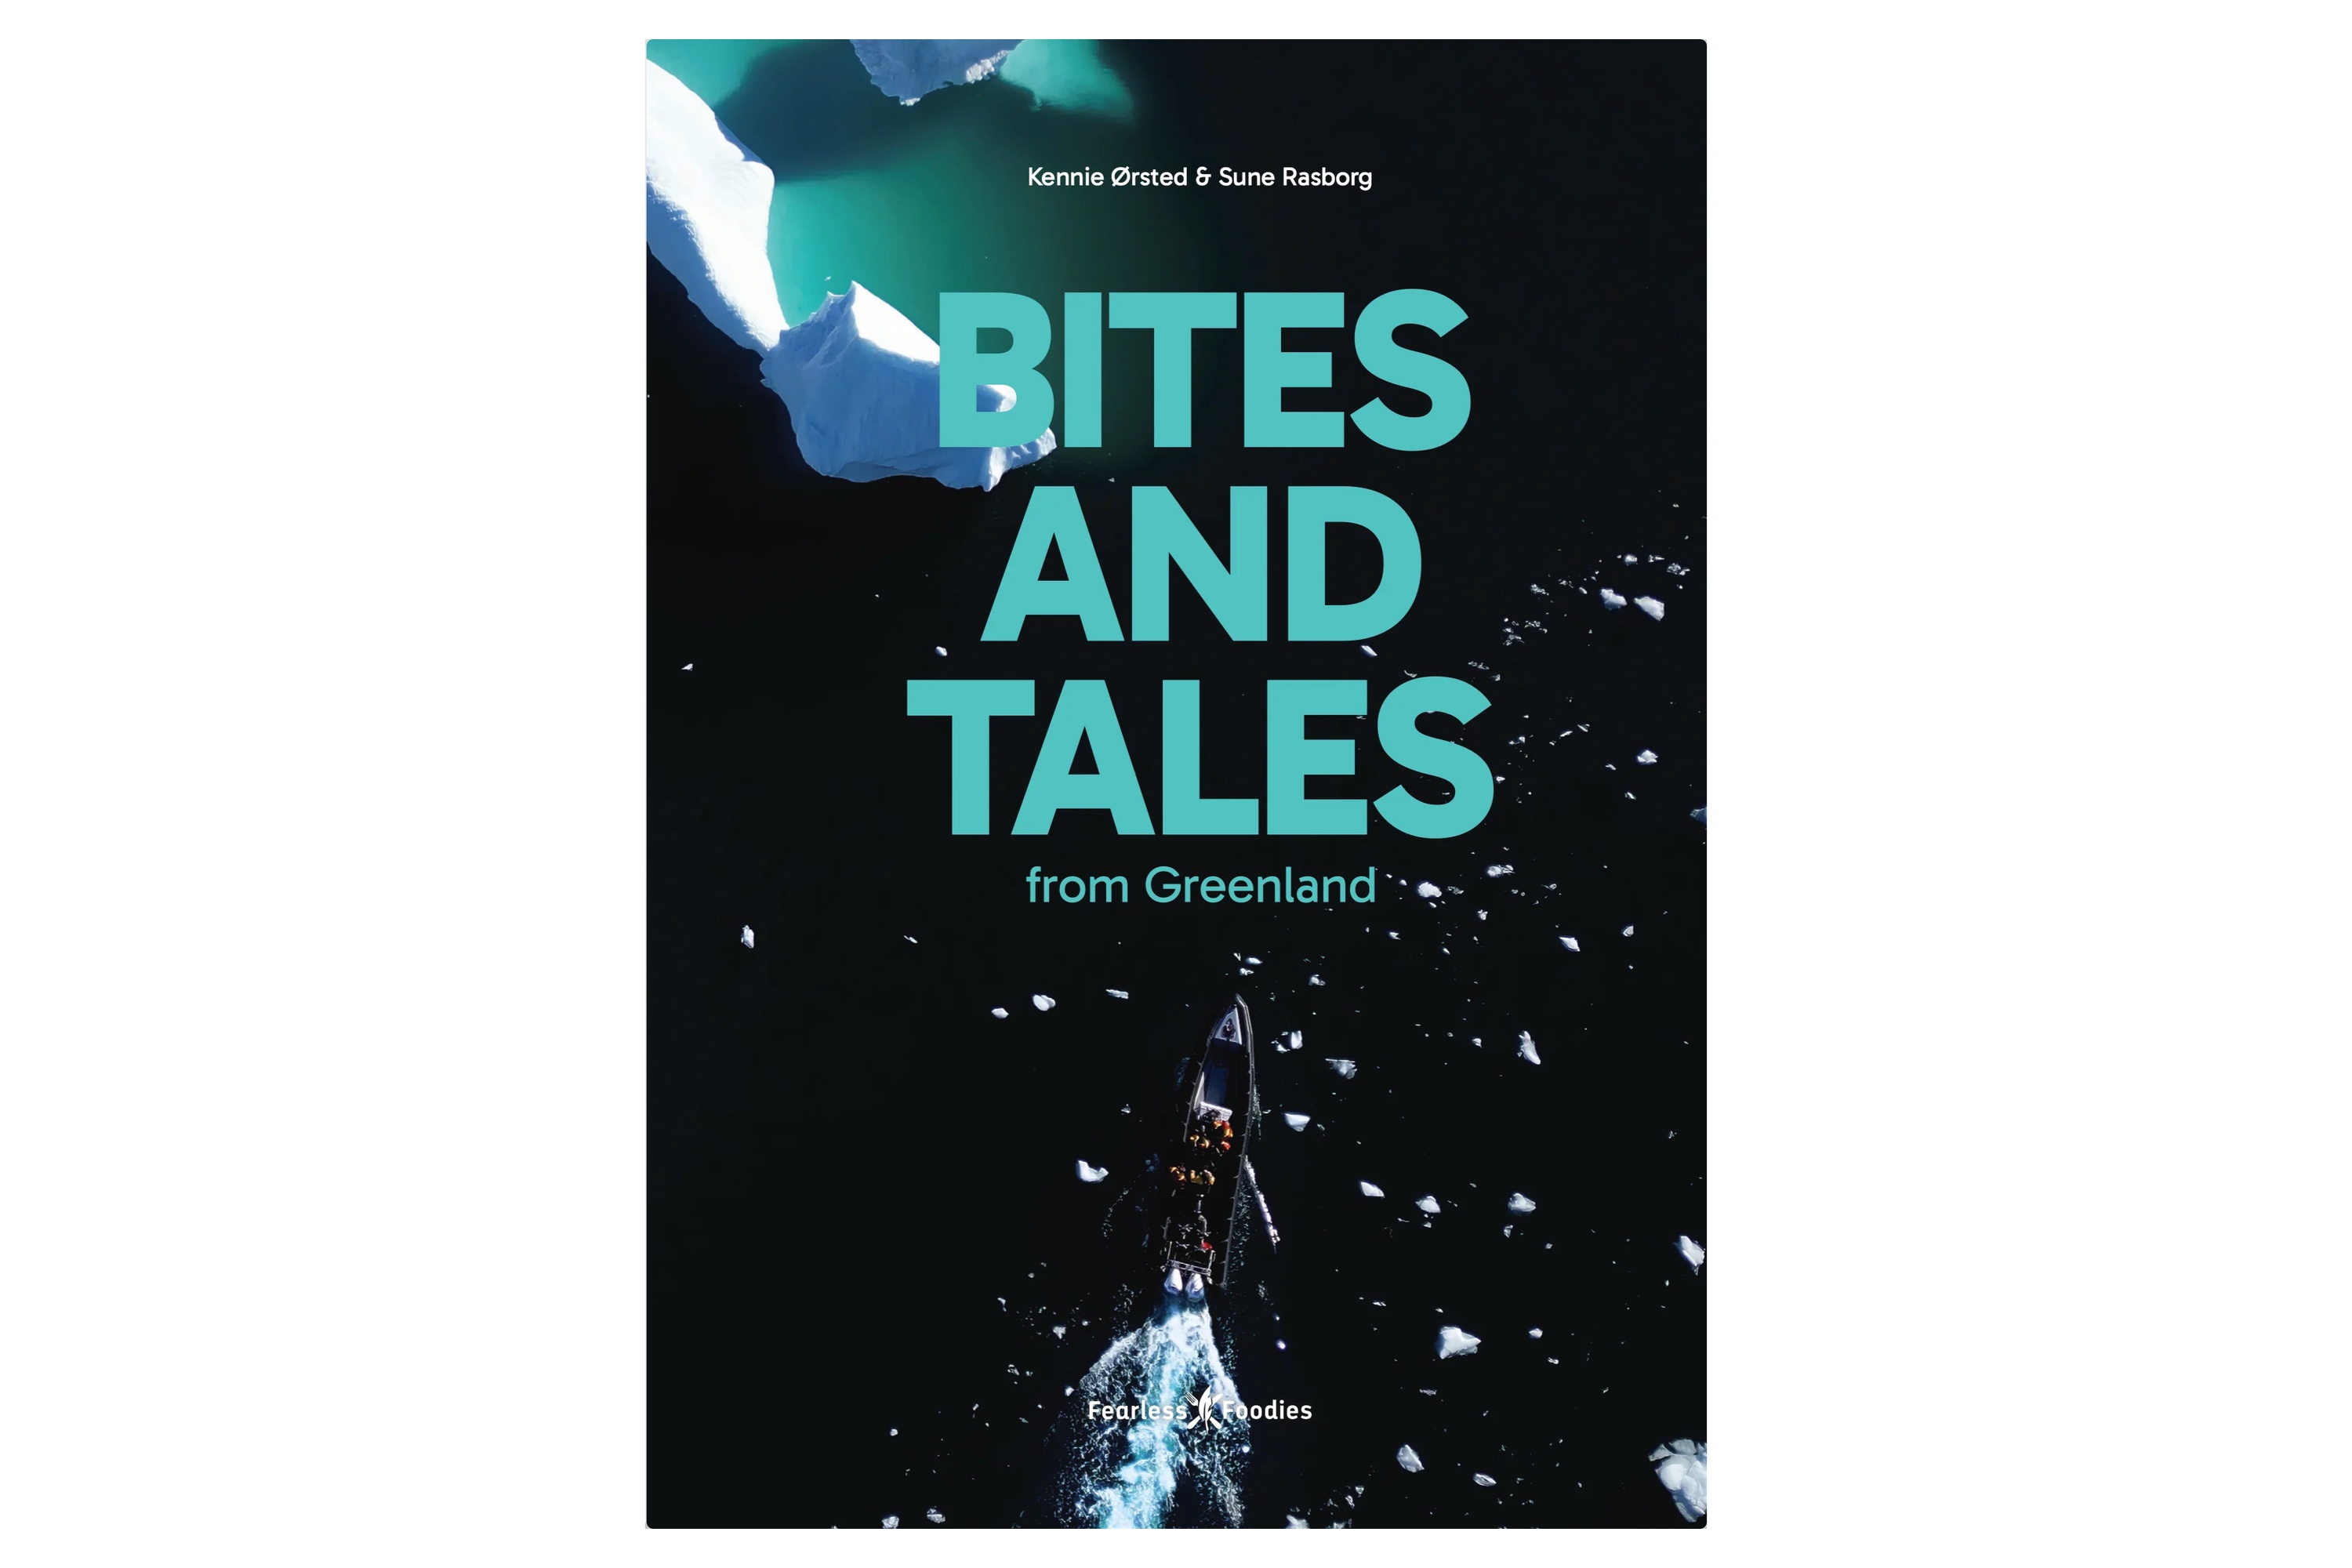 Bites and tales from Greenland / Kennie Ørsted, Sune Rasborg